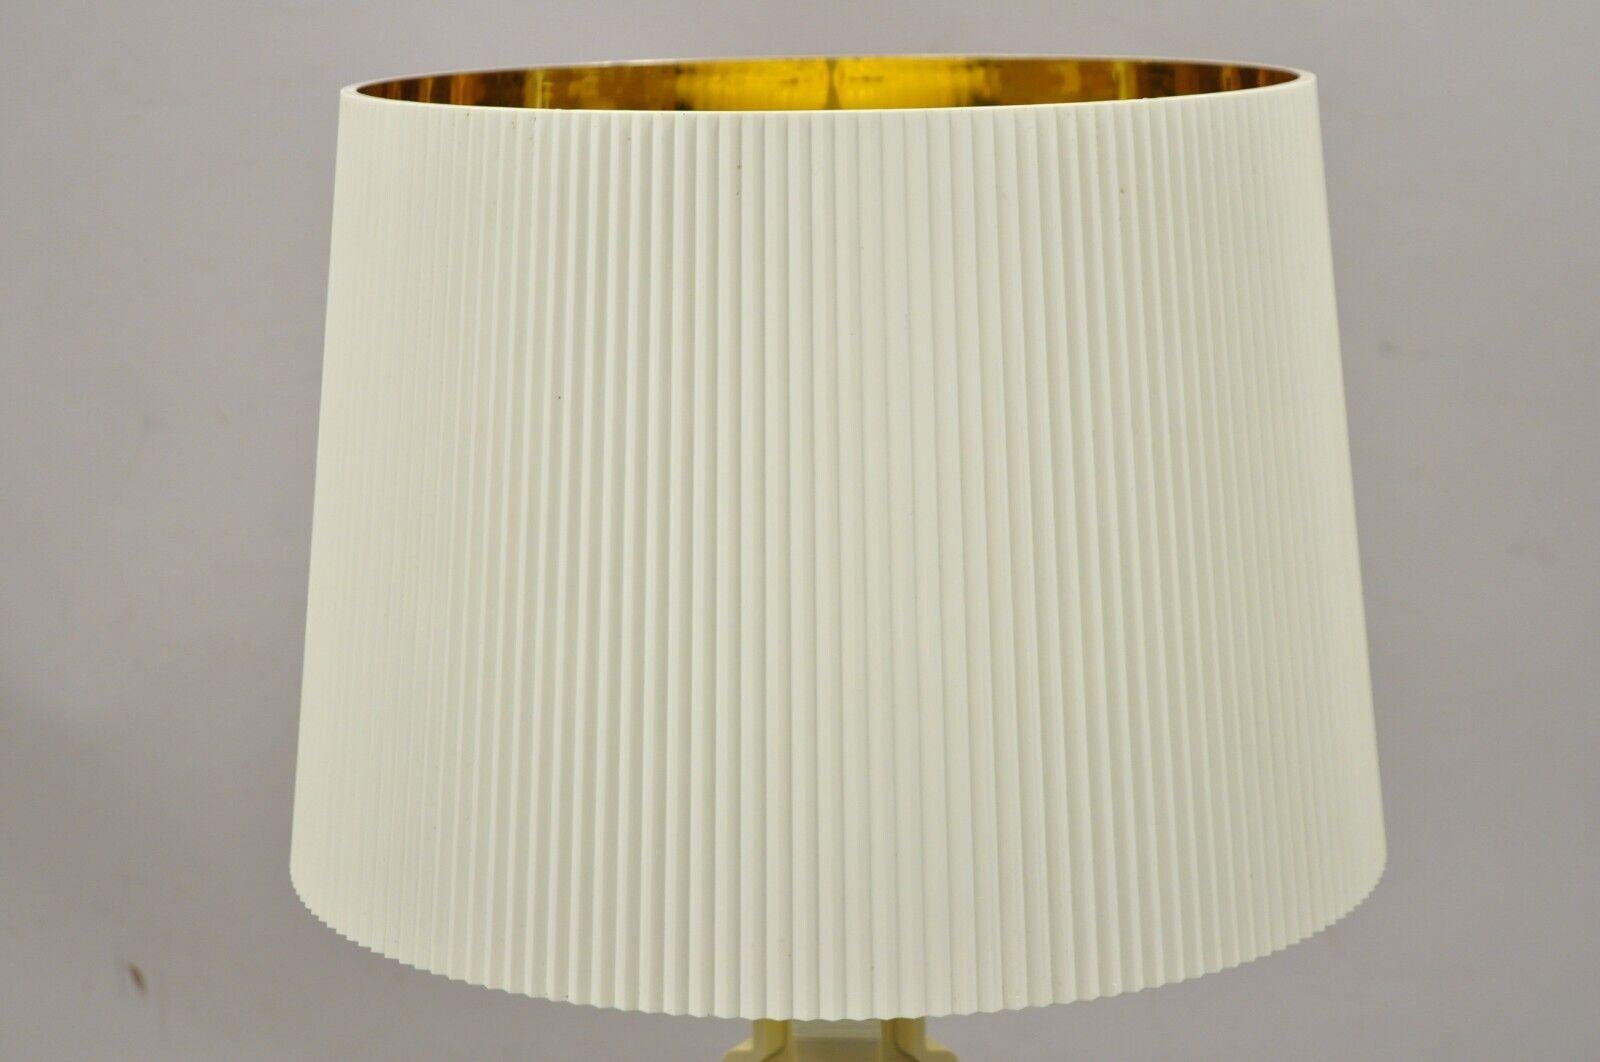 Kartell Ferruccio Laviani Bourgie White Baroque Table Lamp with Shade In Good Condition For Sale In Philadelphia, PA